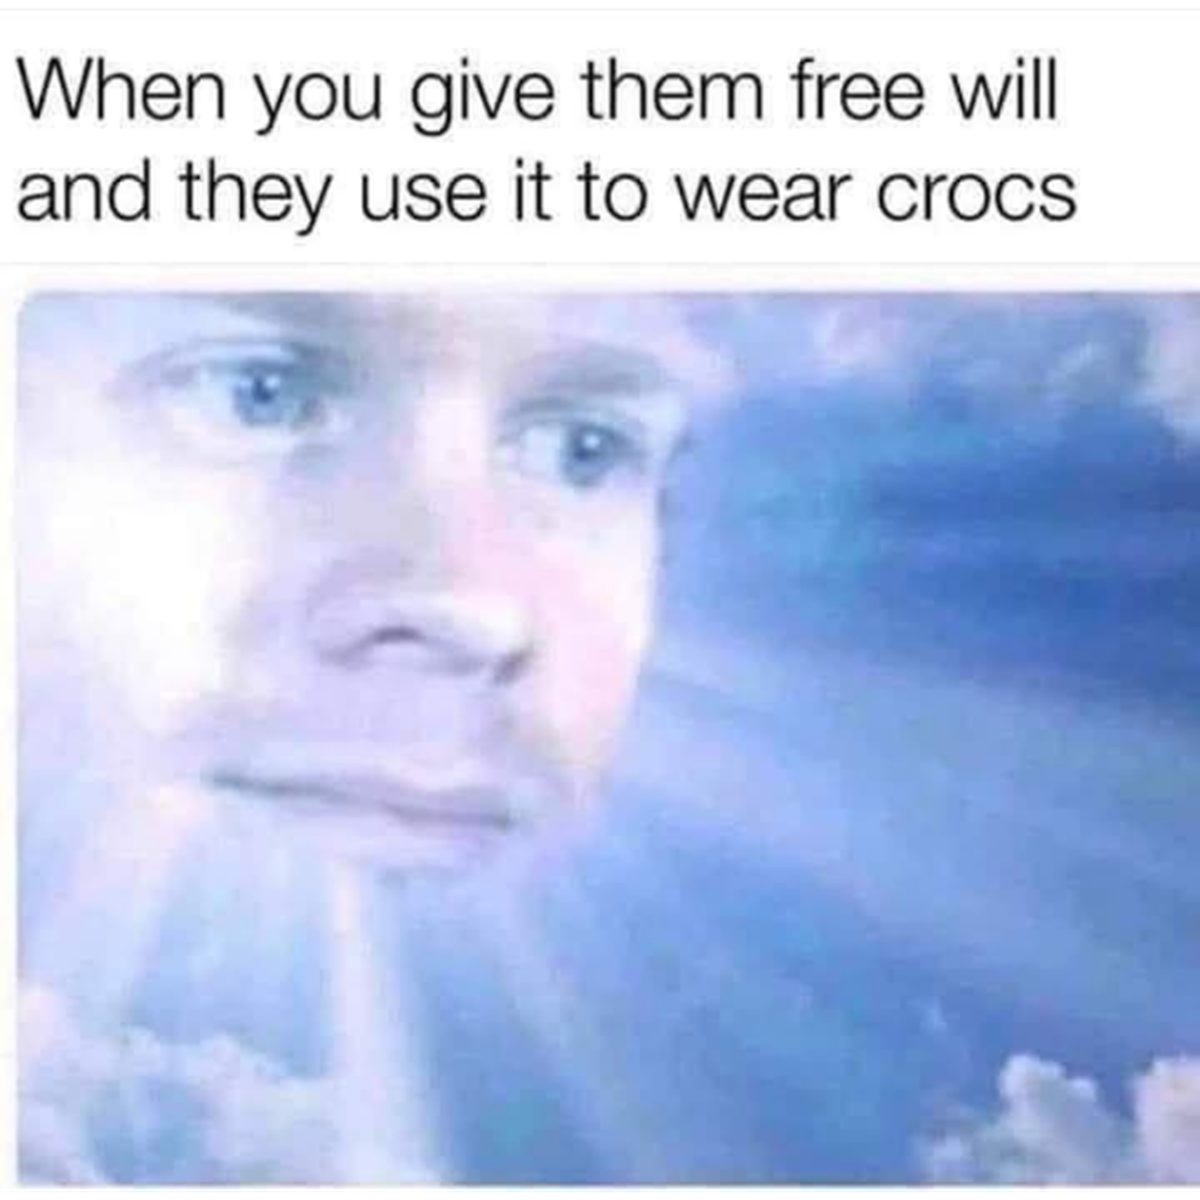 you give them free will - When you give them free will and they use it to wear crocs